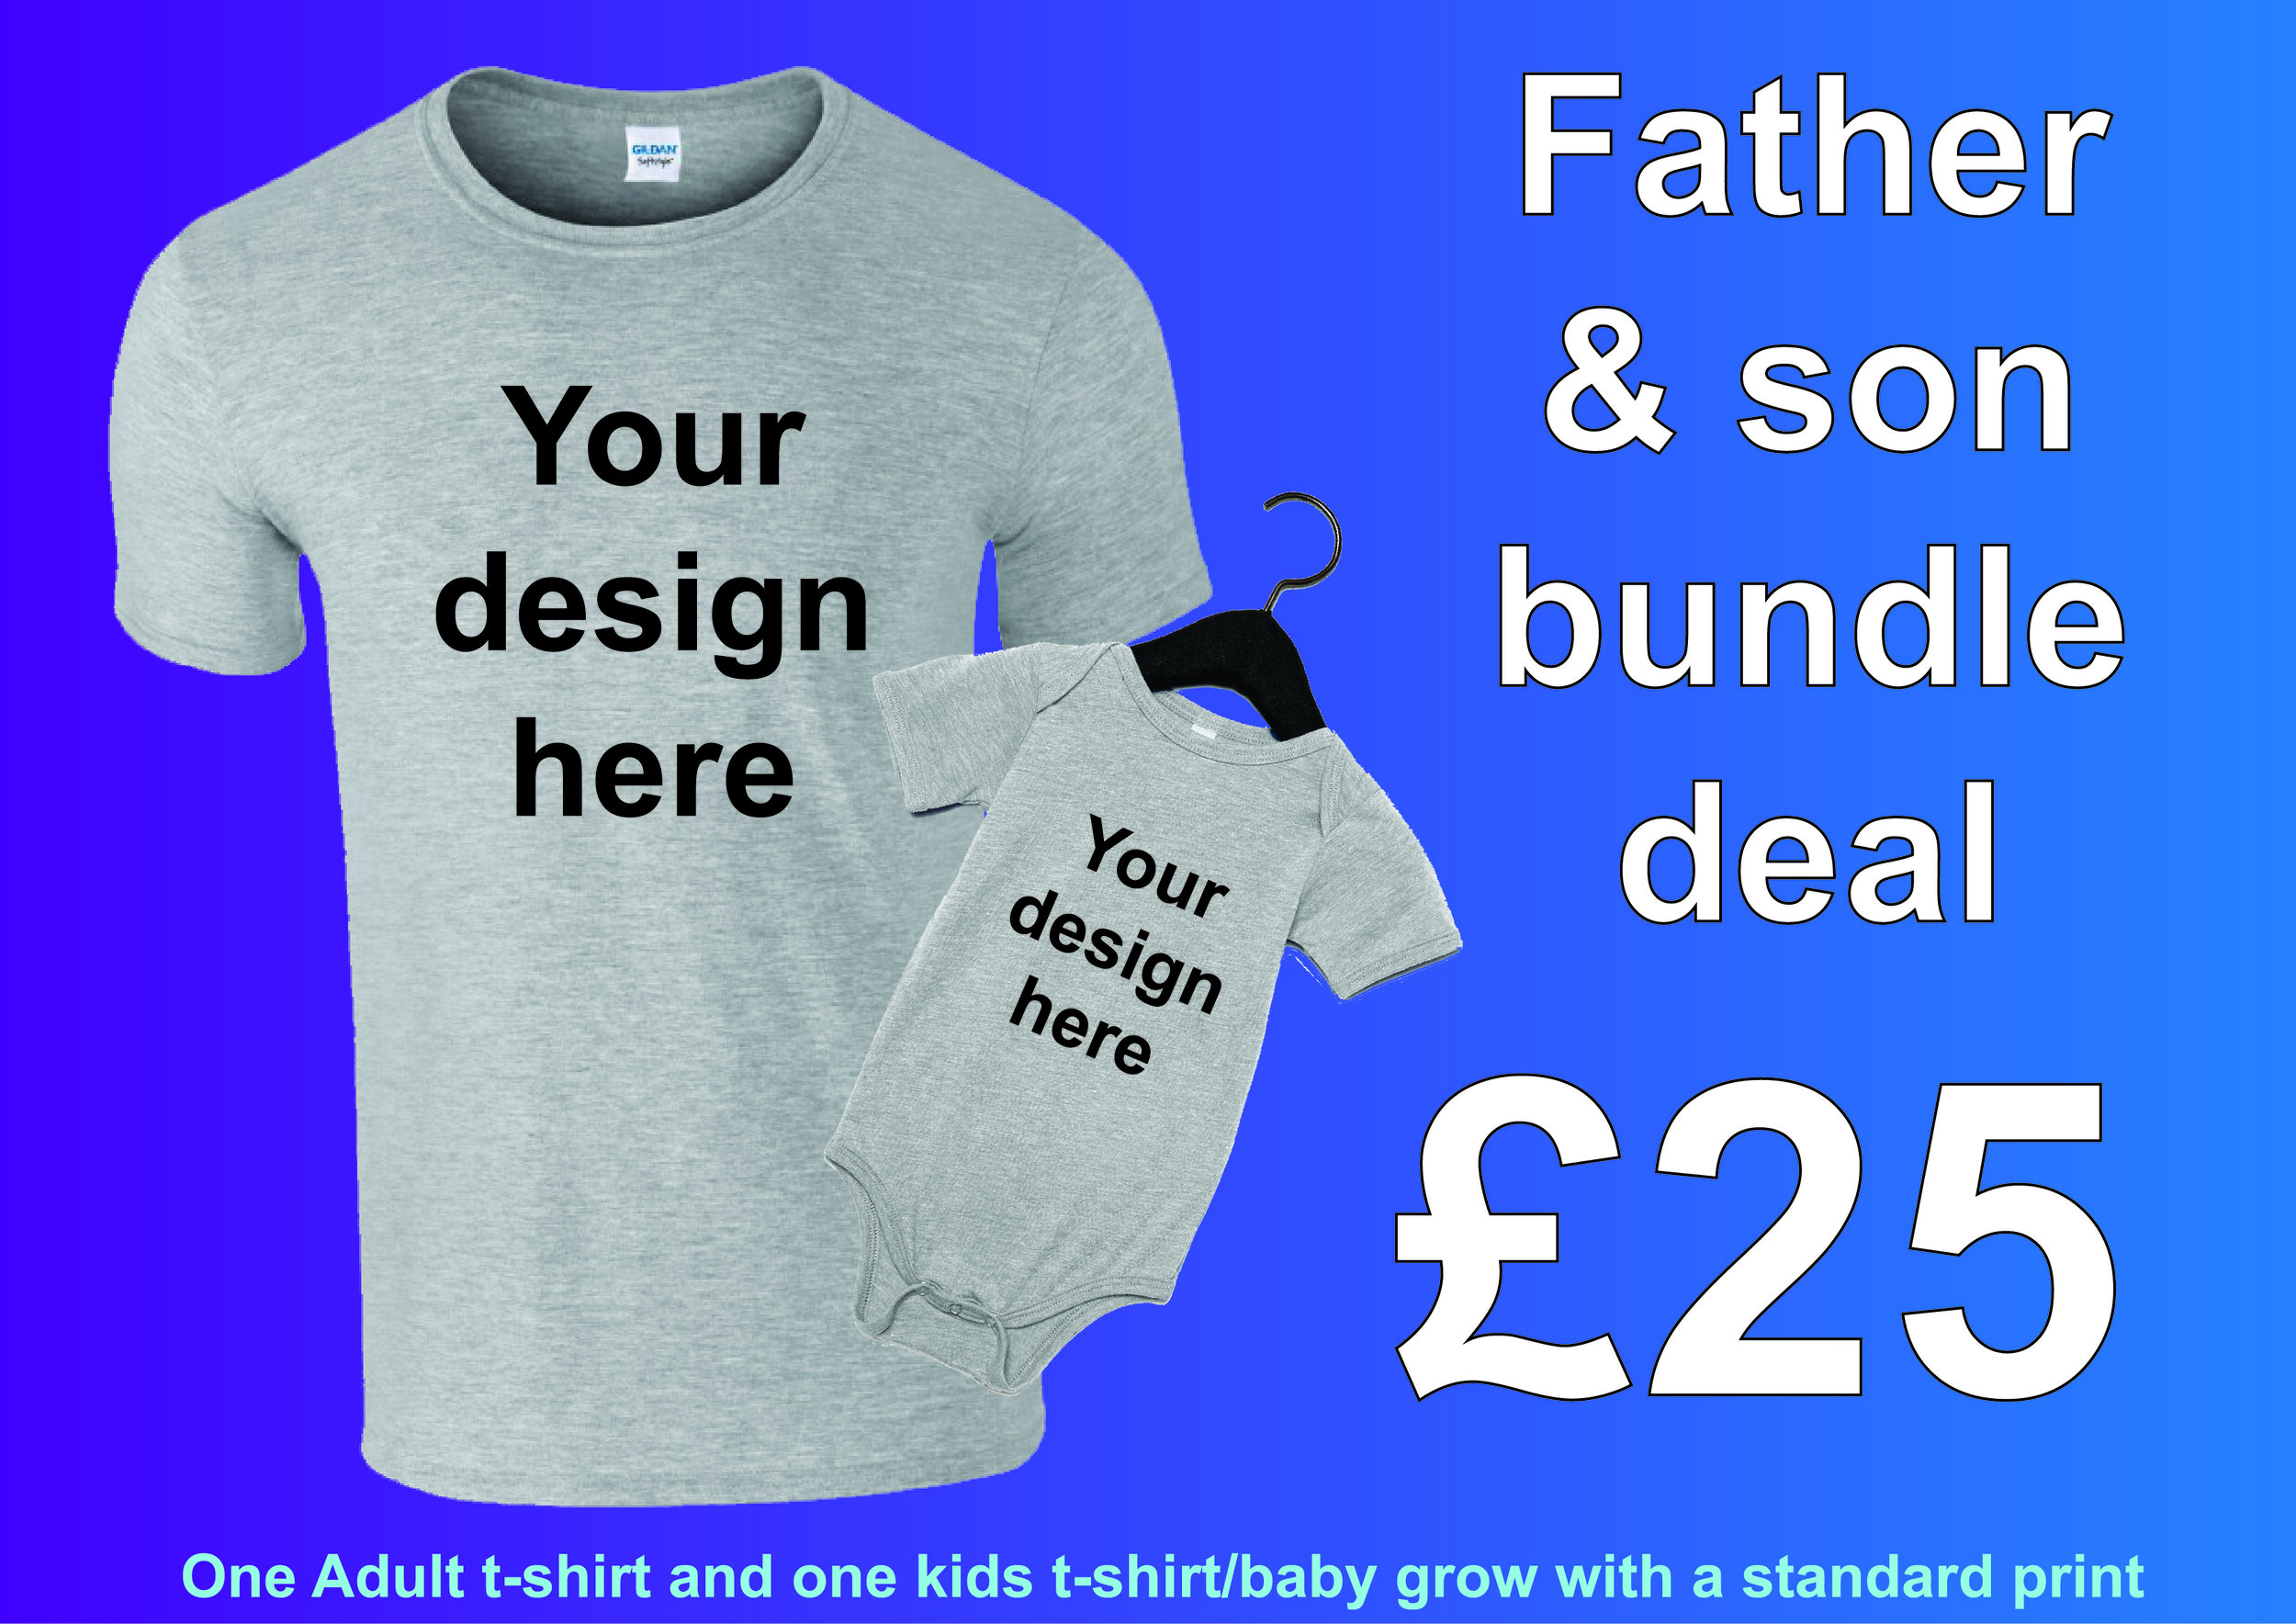 Father and son bundle deal.jpg